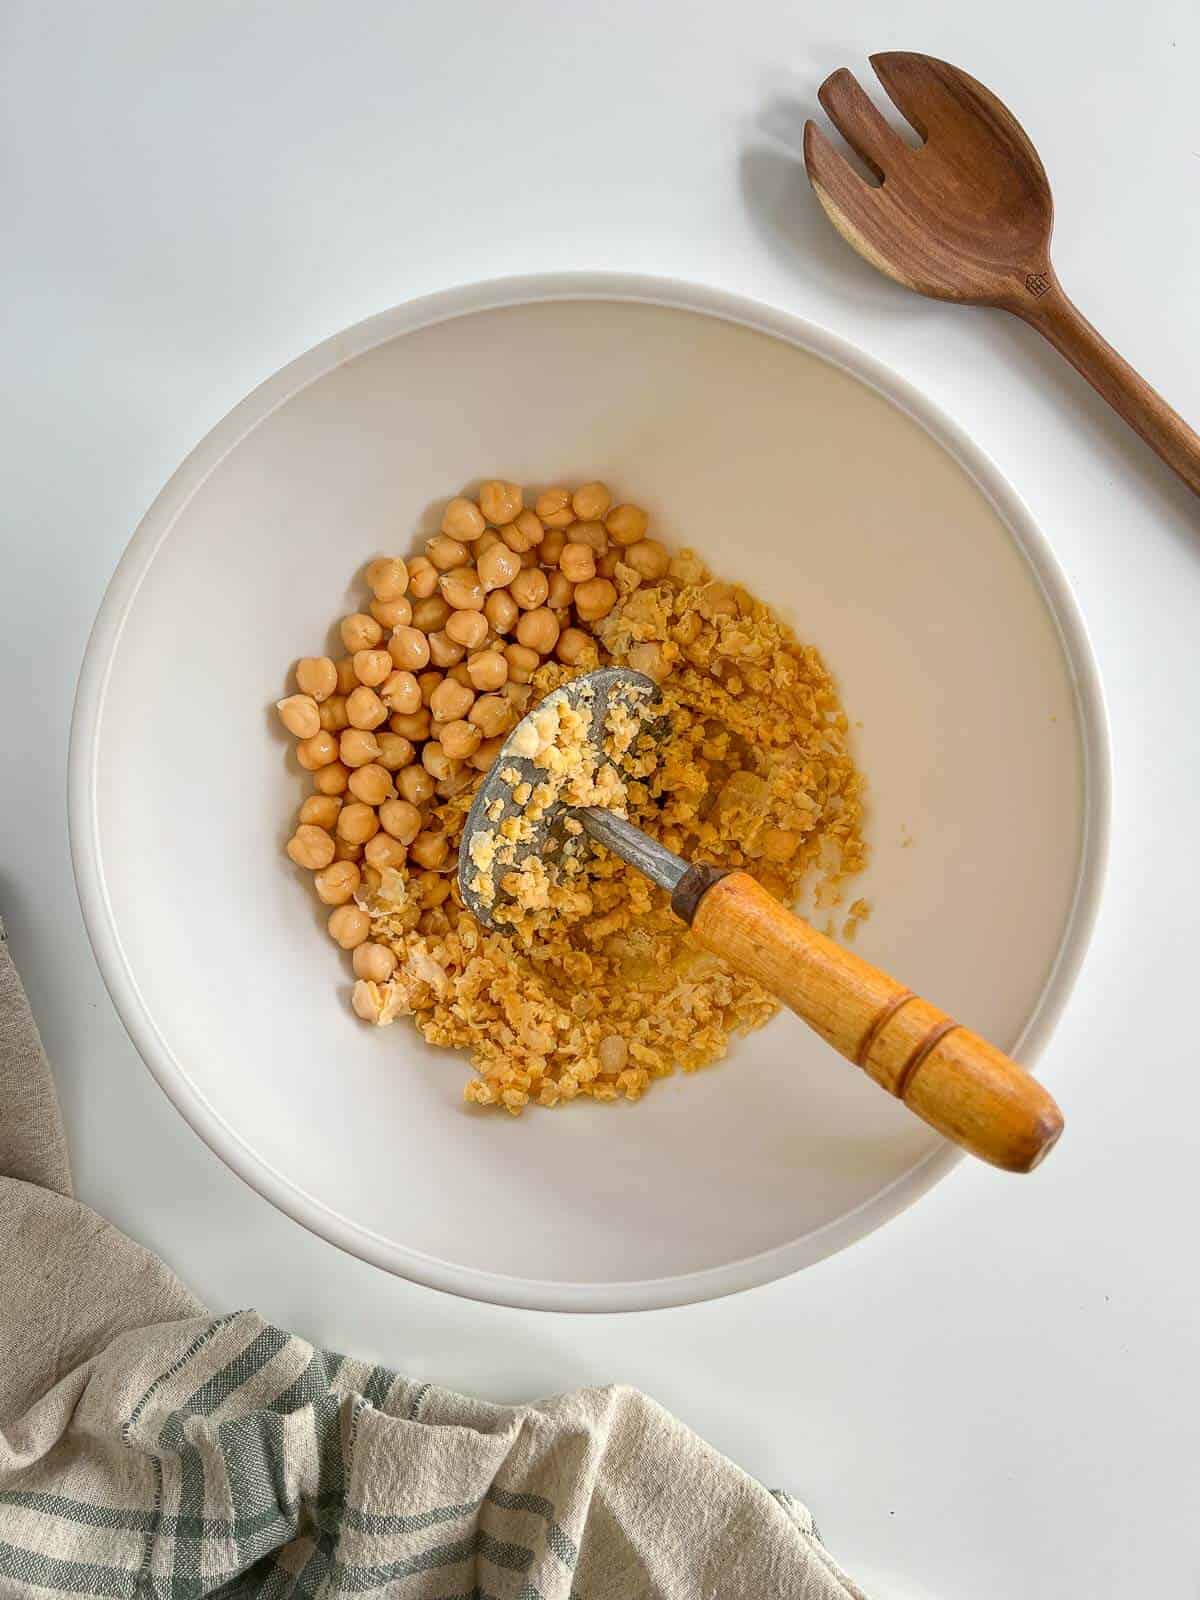 mash the cooked chickpeas with a potato masher